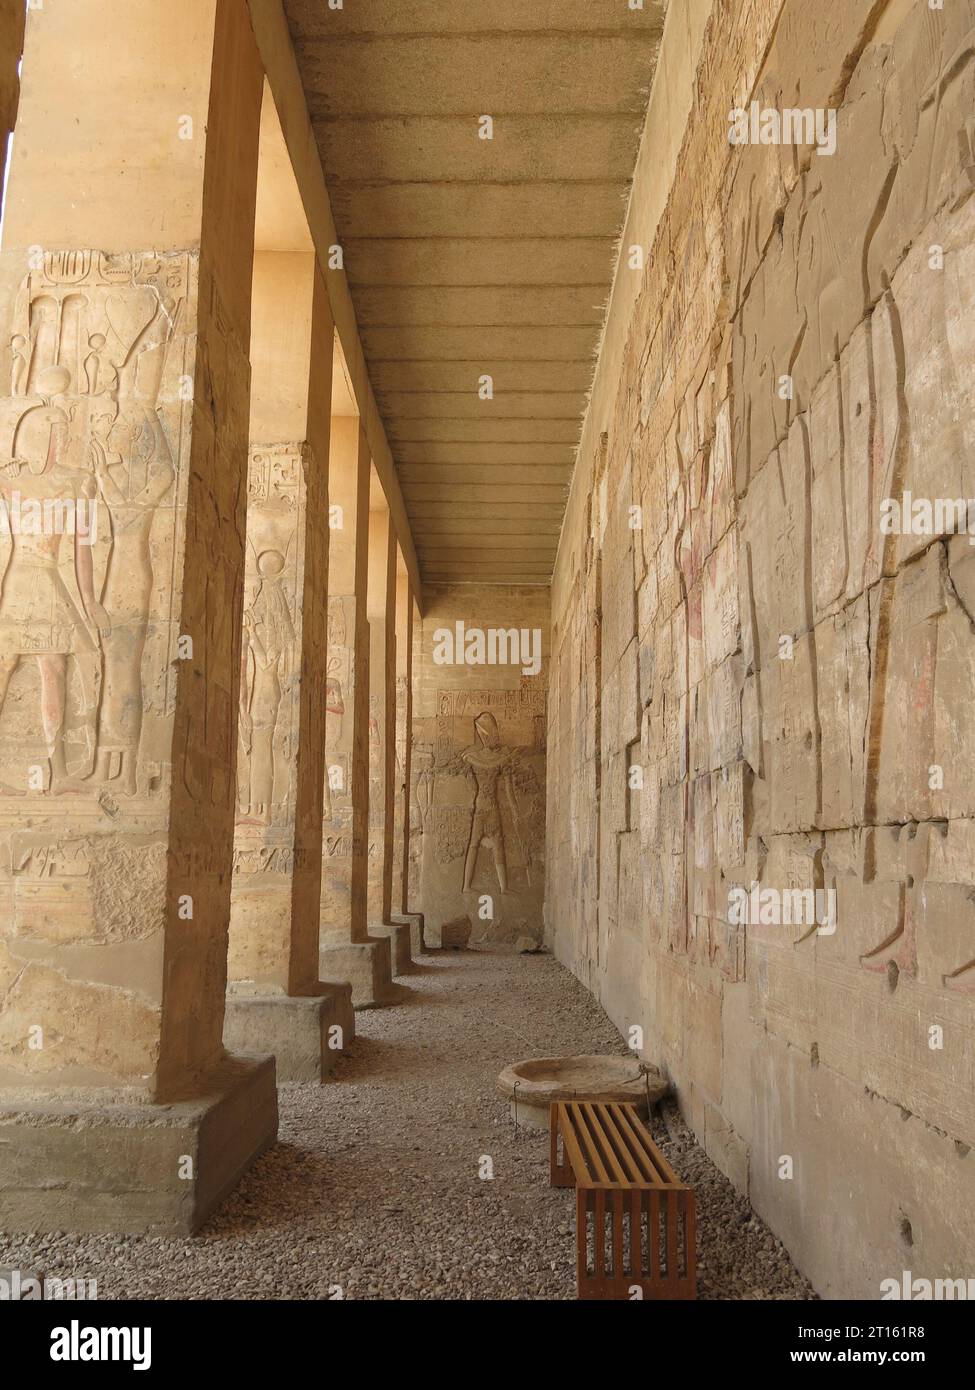 Carved stonework on the pillars and walls of the Ancient Temple of Seti I at the historic necropolis of Abydos, Egypt. Stock Photo